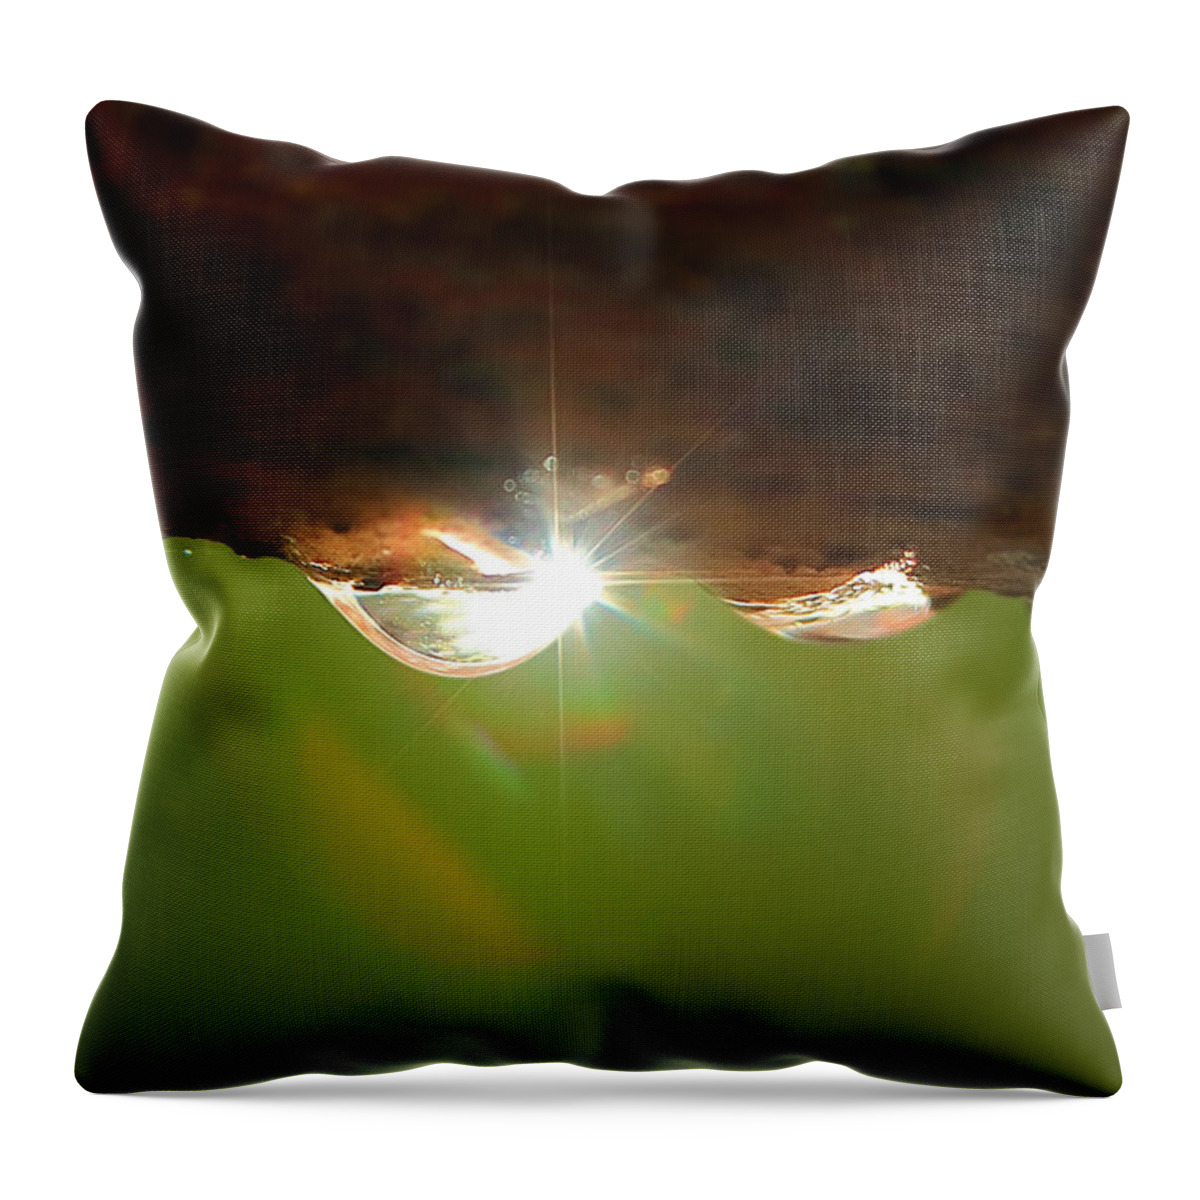 Bubbles Throw Pillow featuring the photograph How Do You Write The Sound Of Pinging A Crystal Goblet by David Andersen